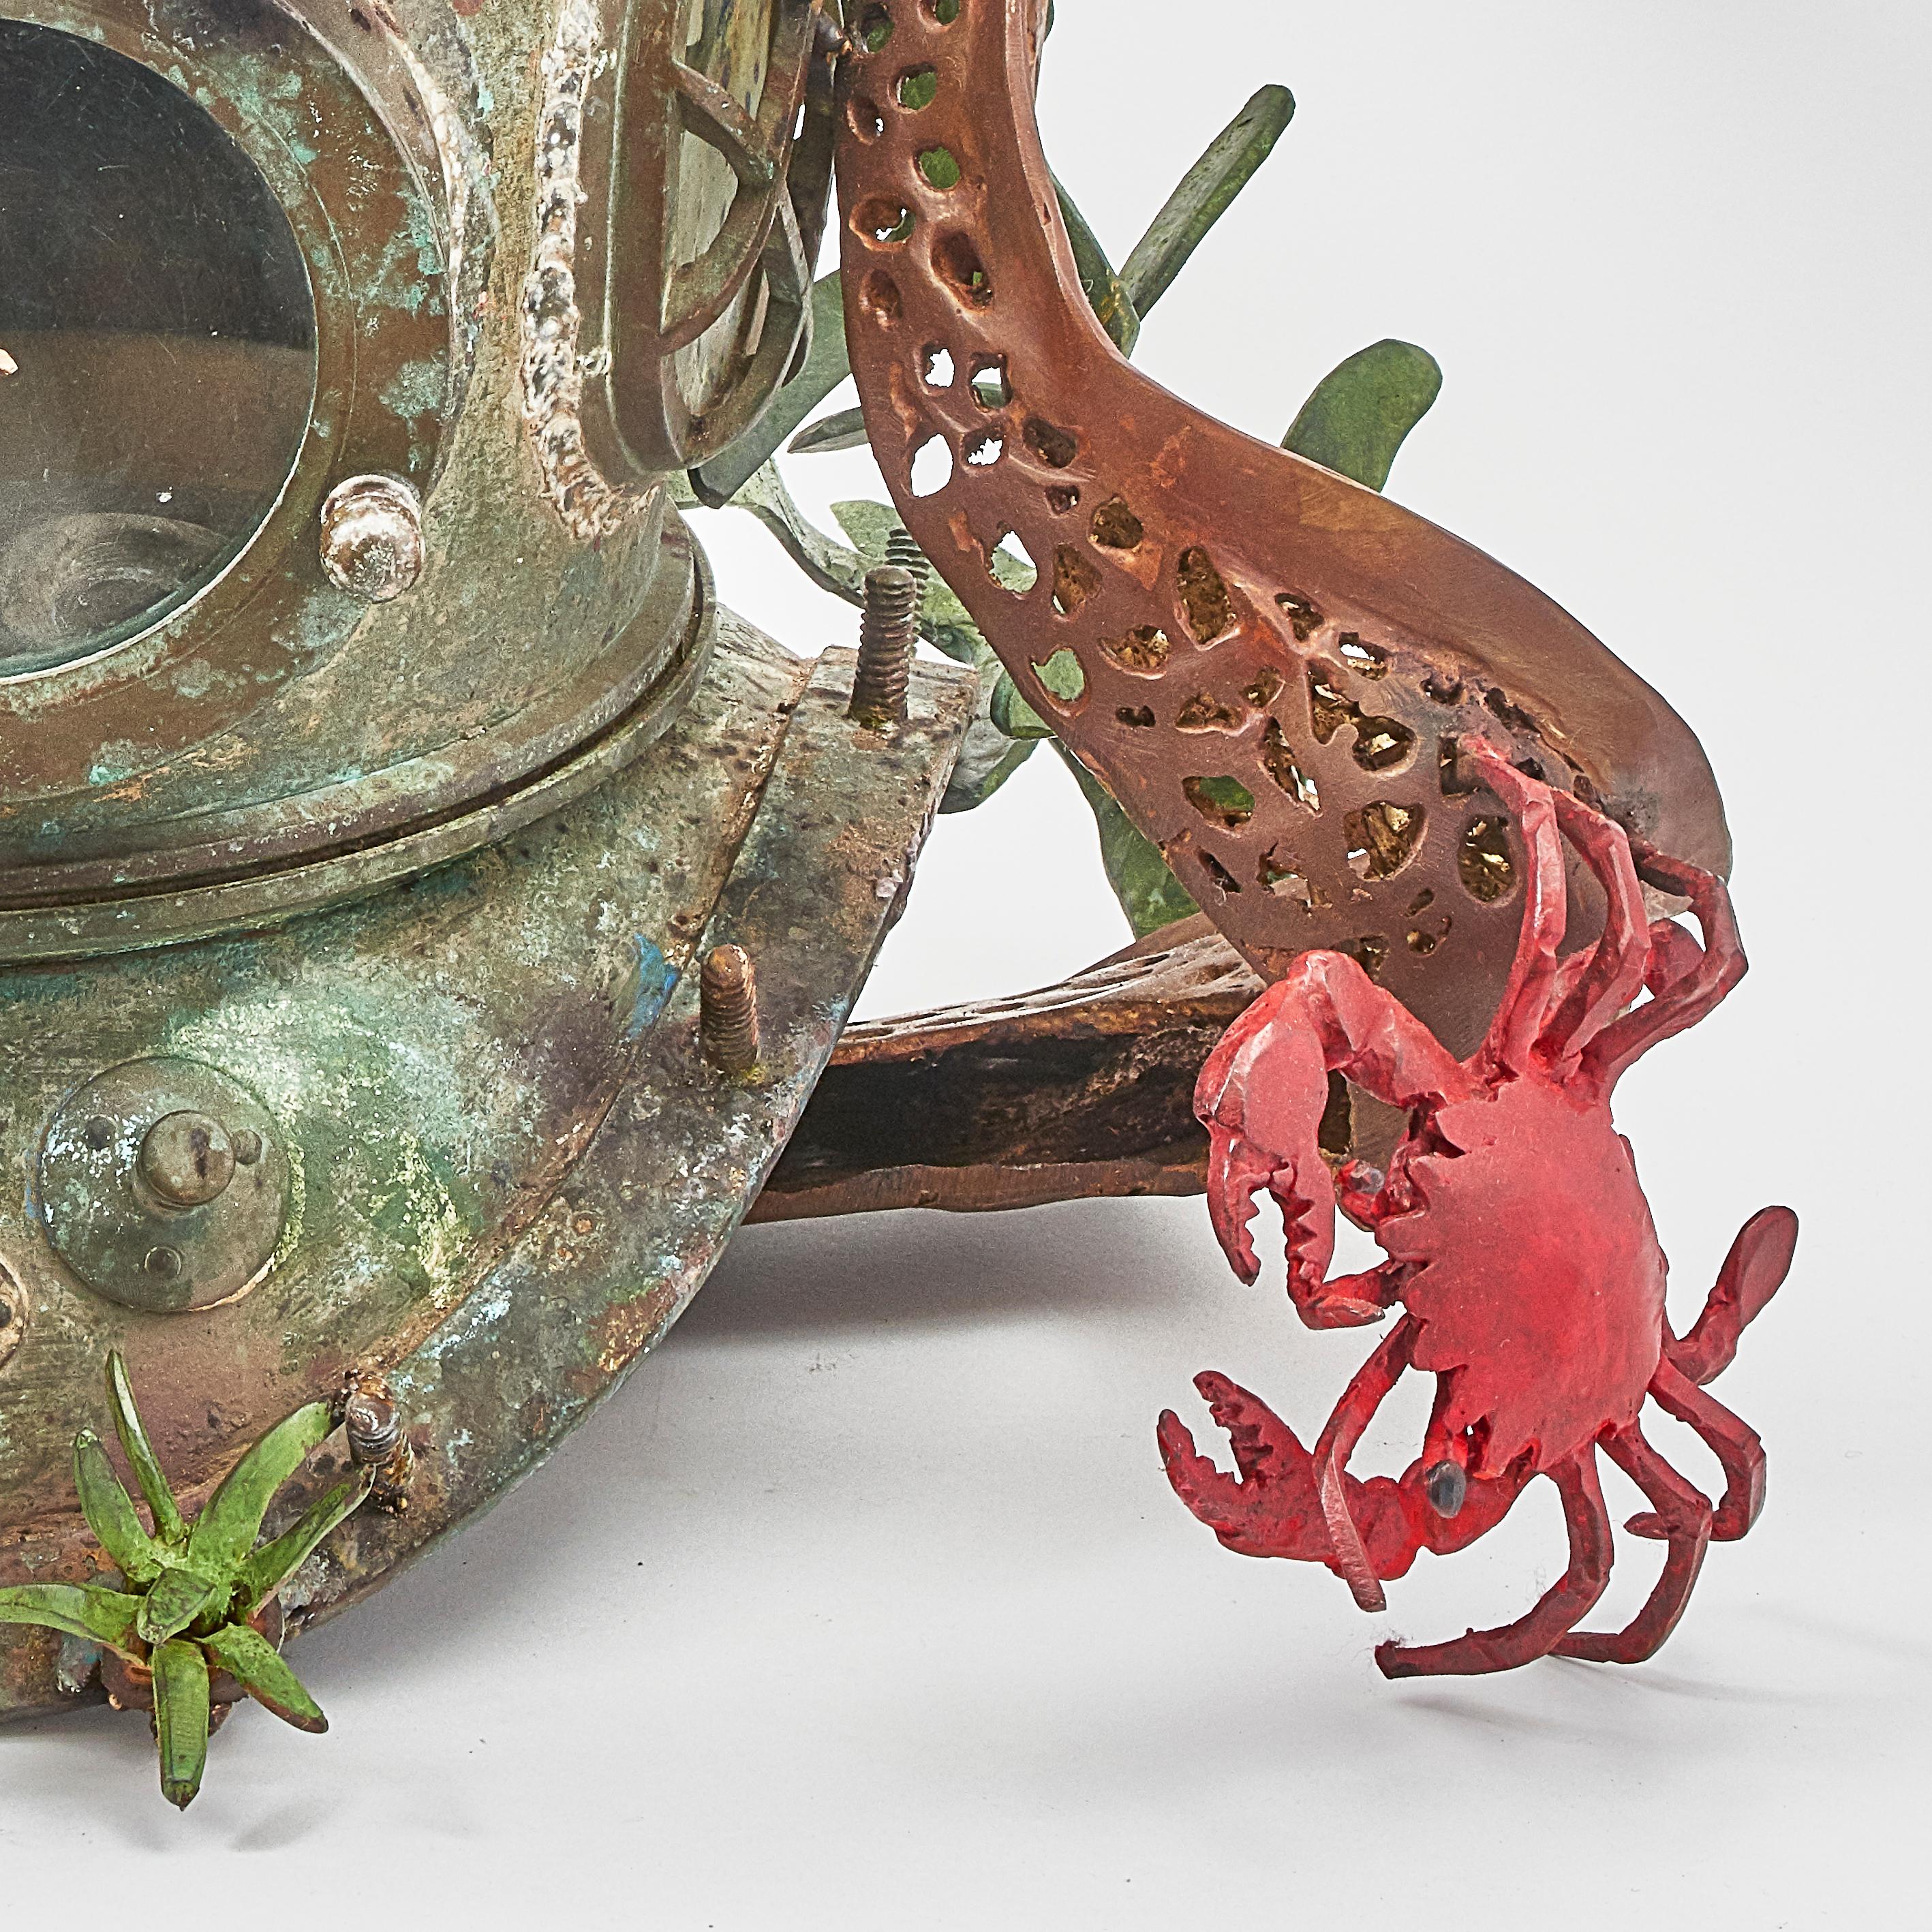 Unique, very impressive large vintage 12 bolt diving helmet, mounted by Belgian Artist Paula Swinnen with an array of aquatic animals and plants, signed by the artist, 2019. The vintage brass helmet with glass vision portholes and a TOA Japan makers